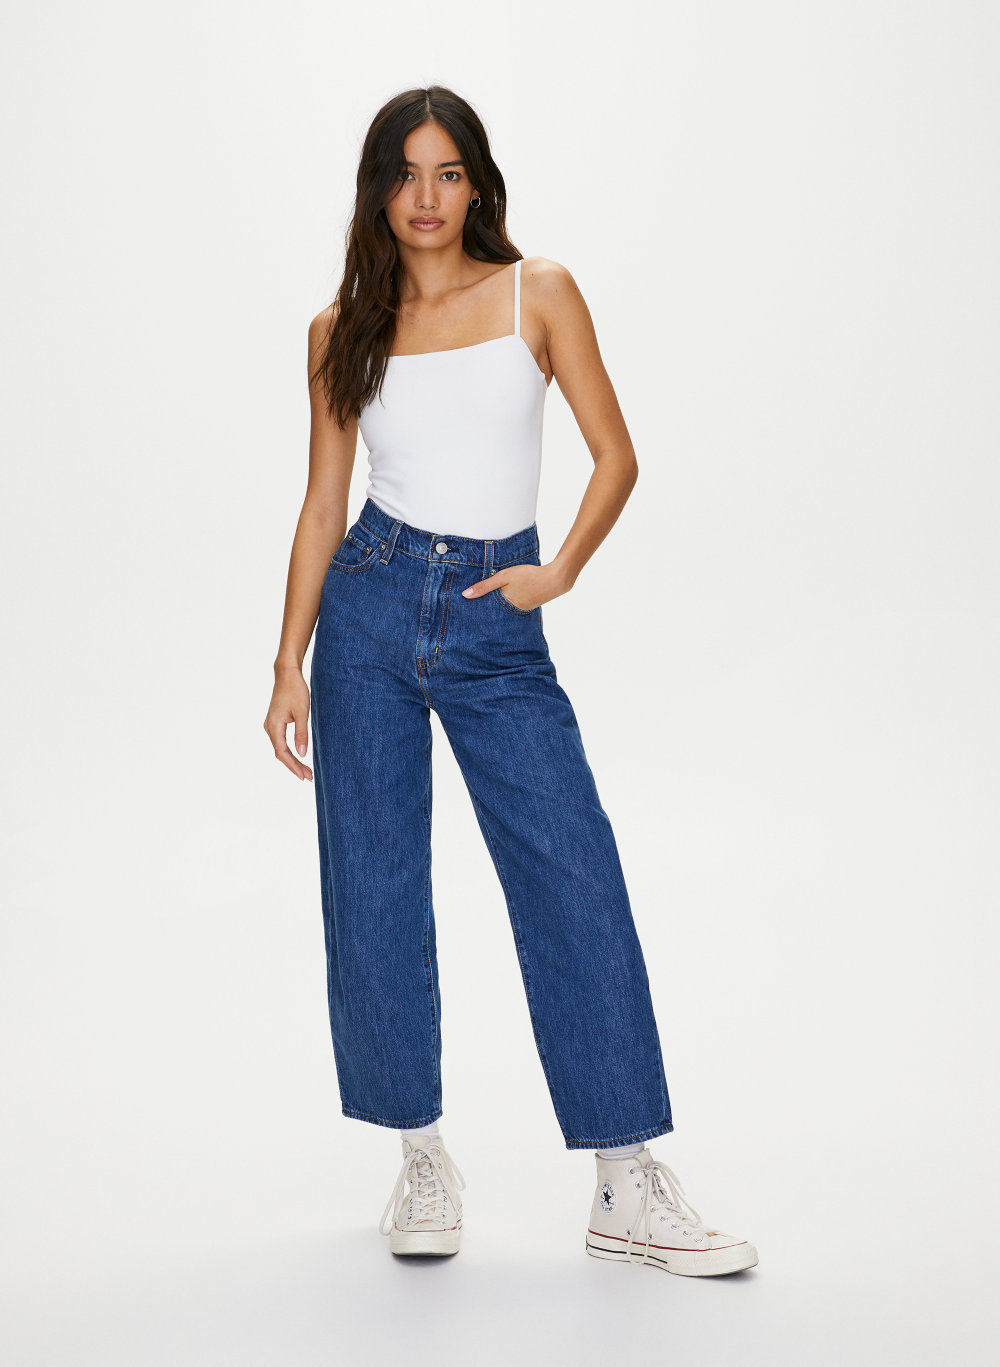 balloon fit jeans